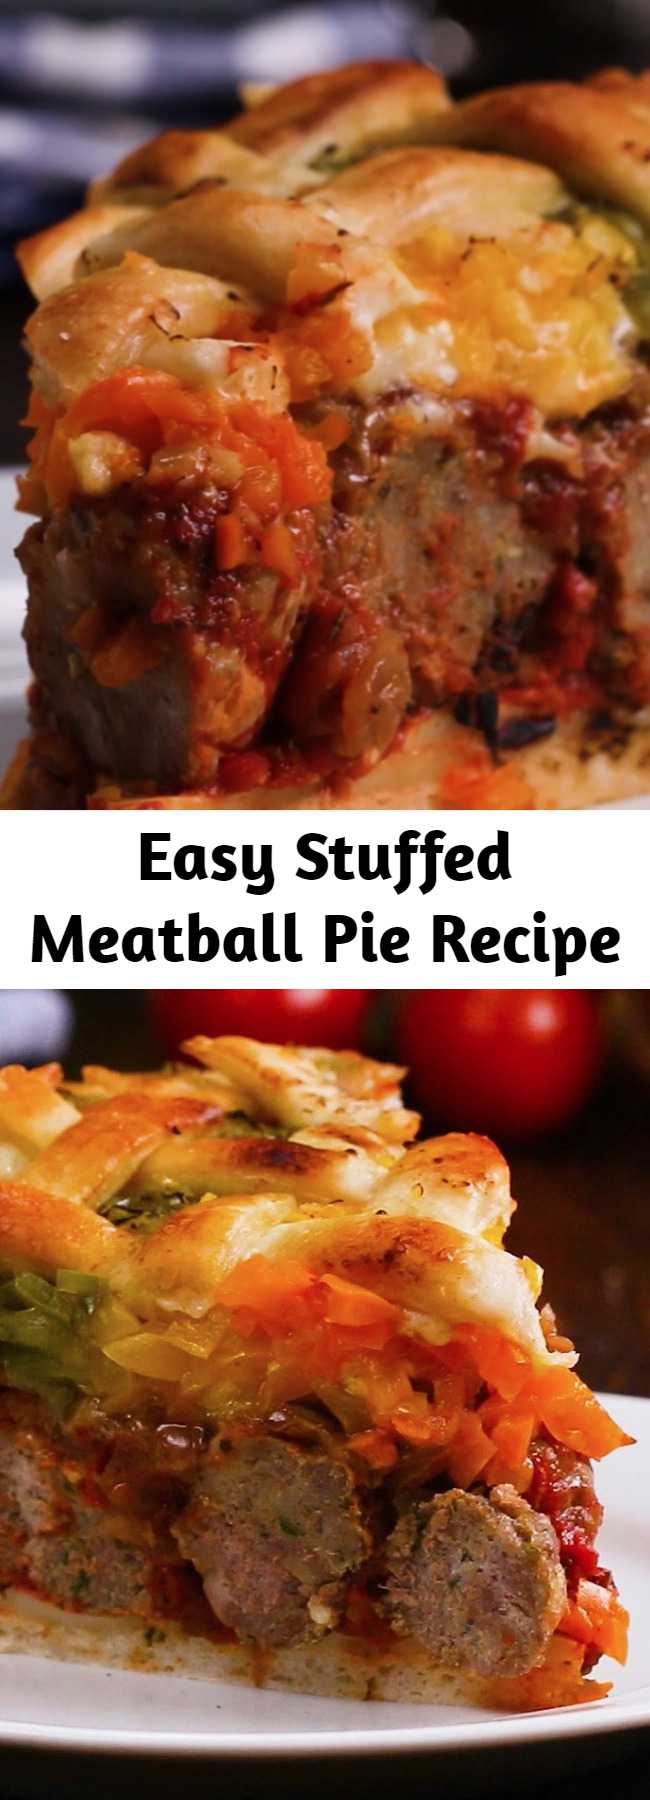 Easy Stuffed Meatball Pie Recipe - This was really tasty and easy to make. Every meatball-lover will adore this Stuffed Meatball Pie.